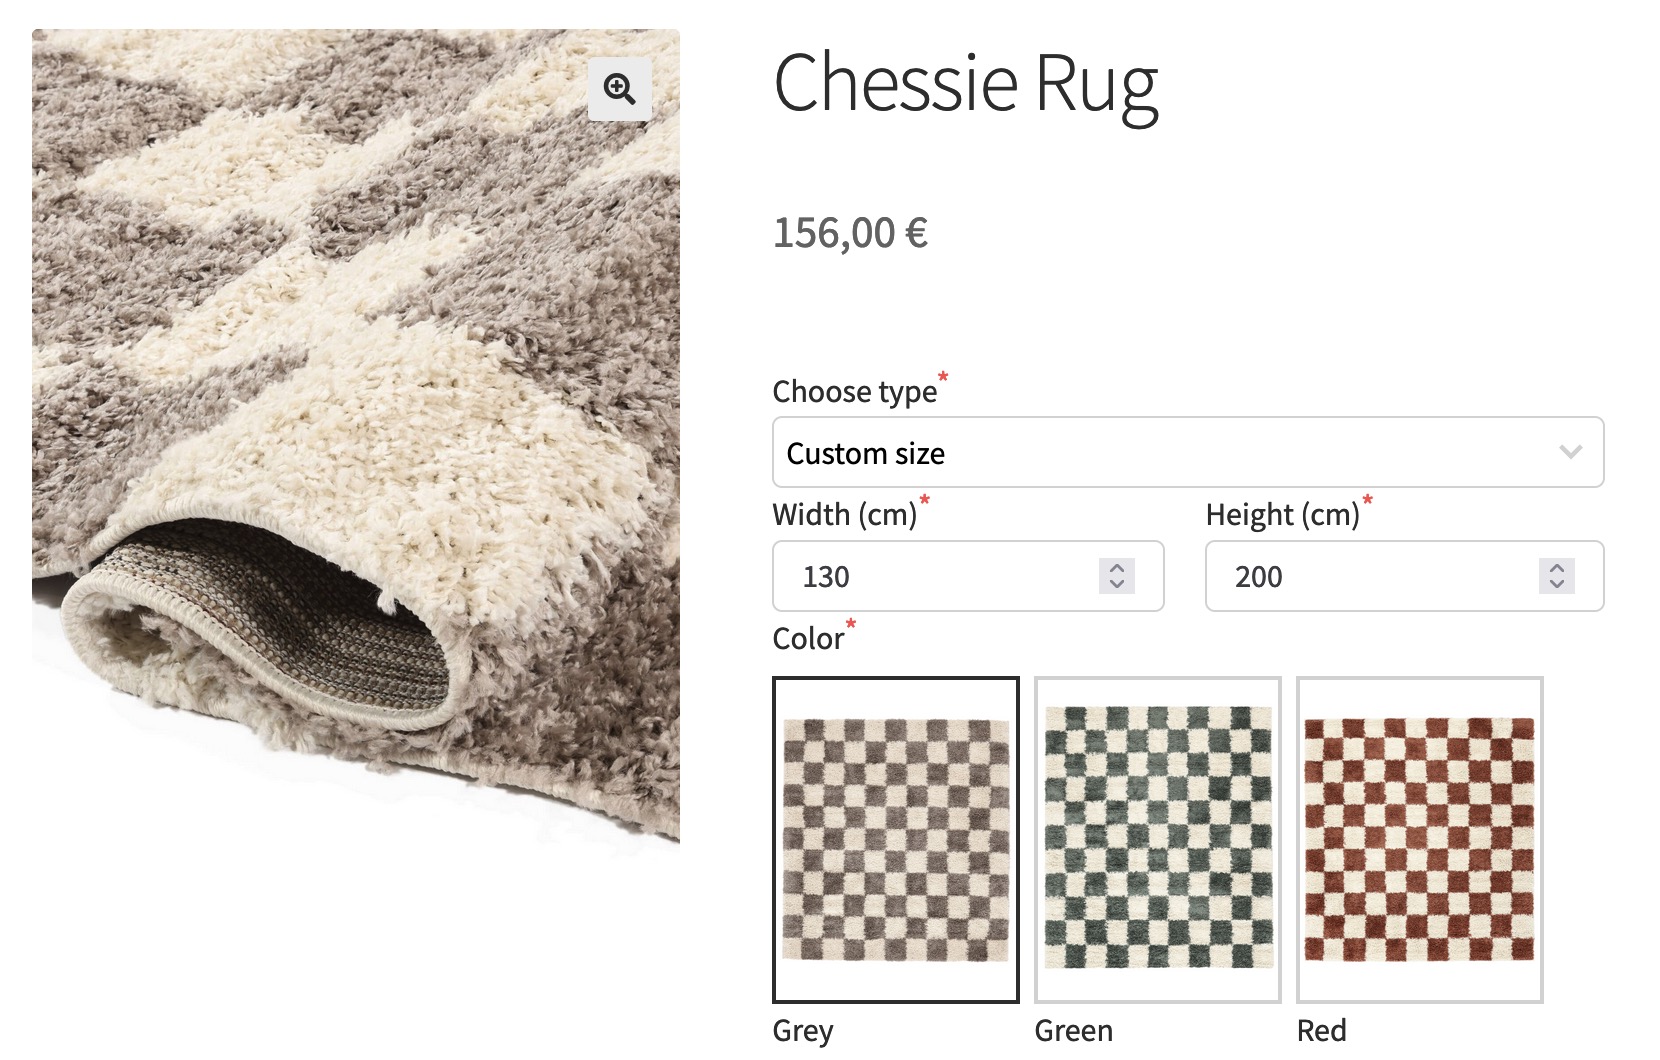 How to create a product with measurement pricing in WooCommerce